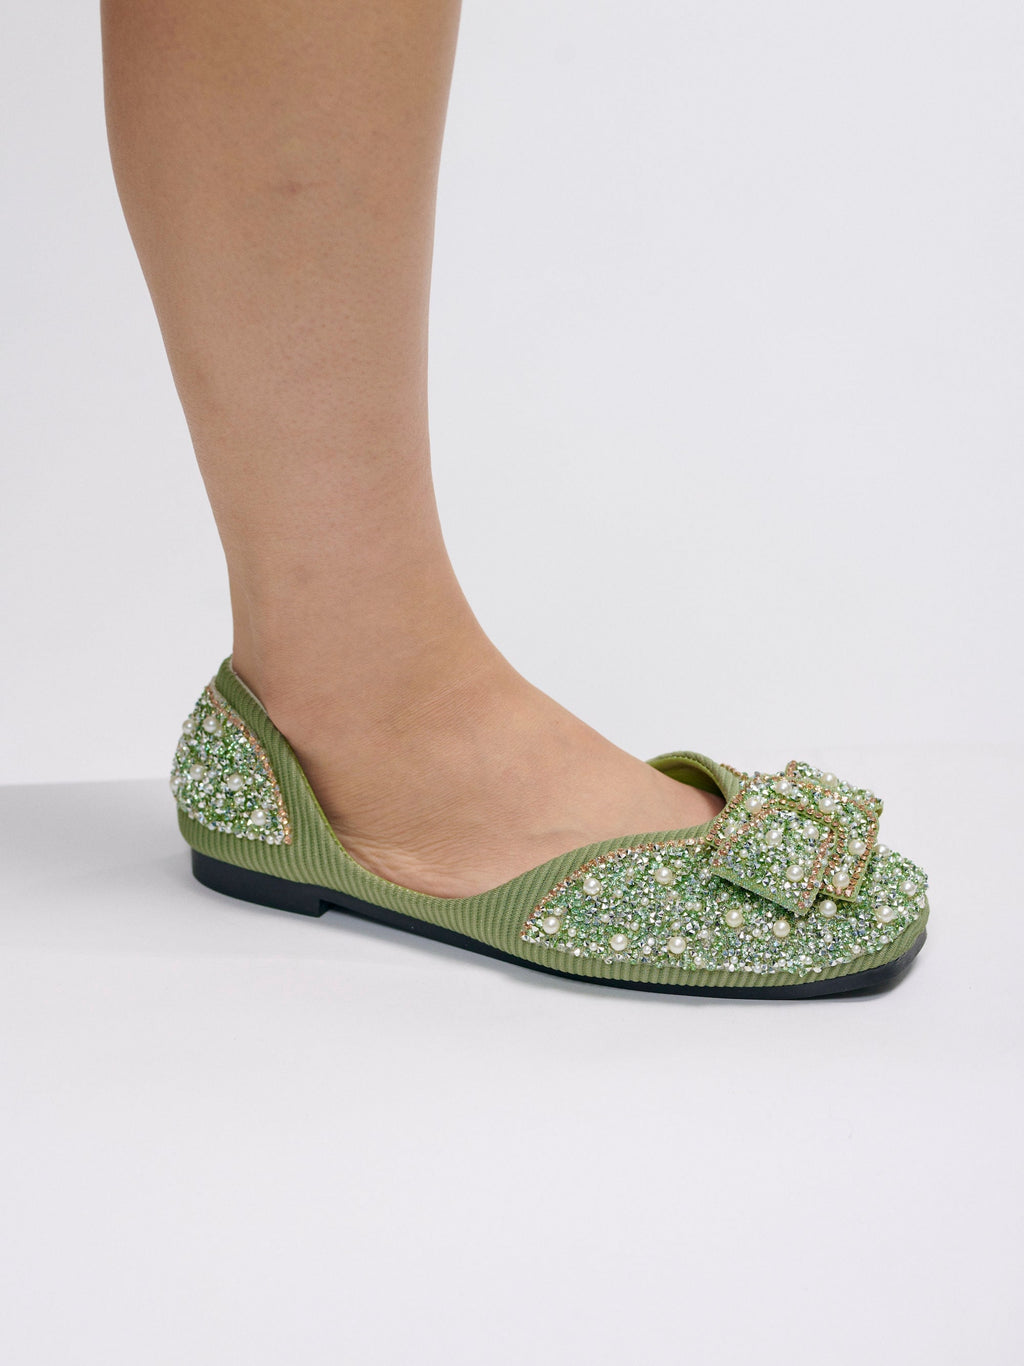 The Pearled and Bejeweled Ballet Flat | Blinged Out Yet Laid Back | Super Cute Slip On Shoe in Green with Buckle Detail | Goose Taffy